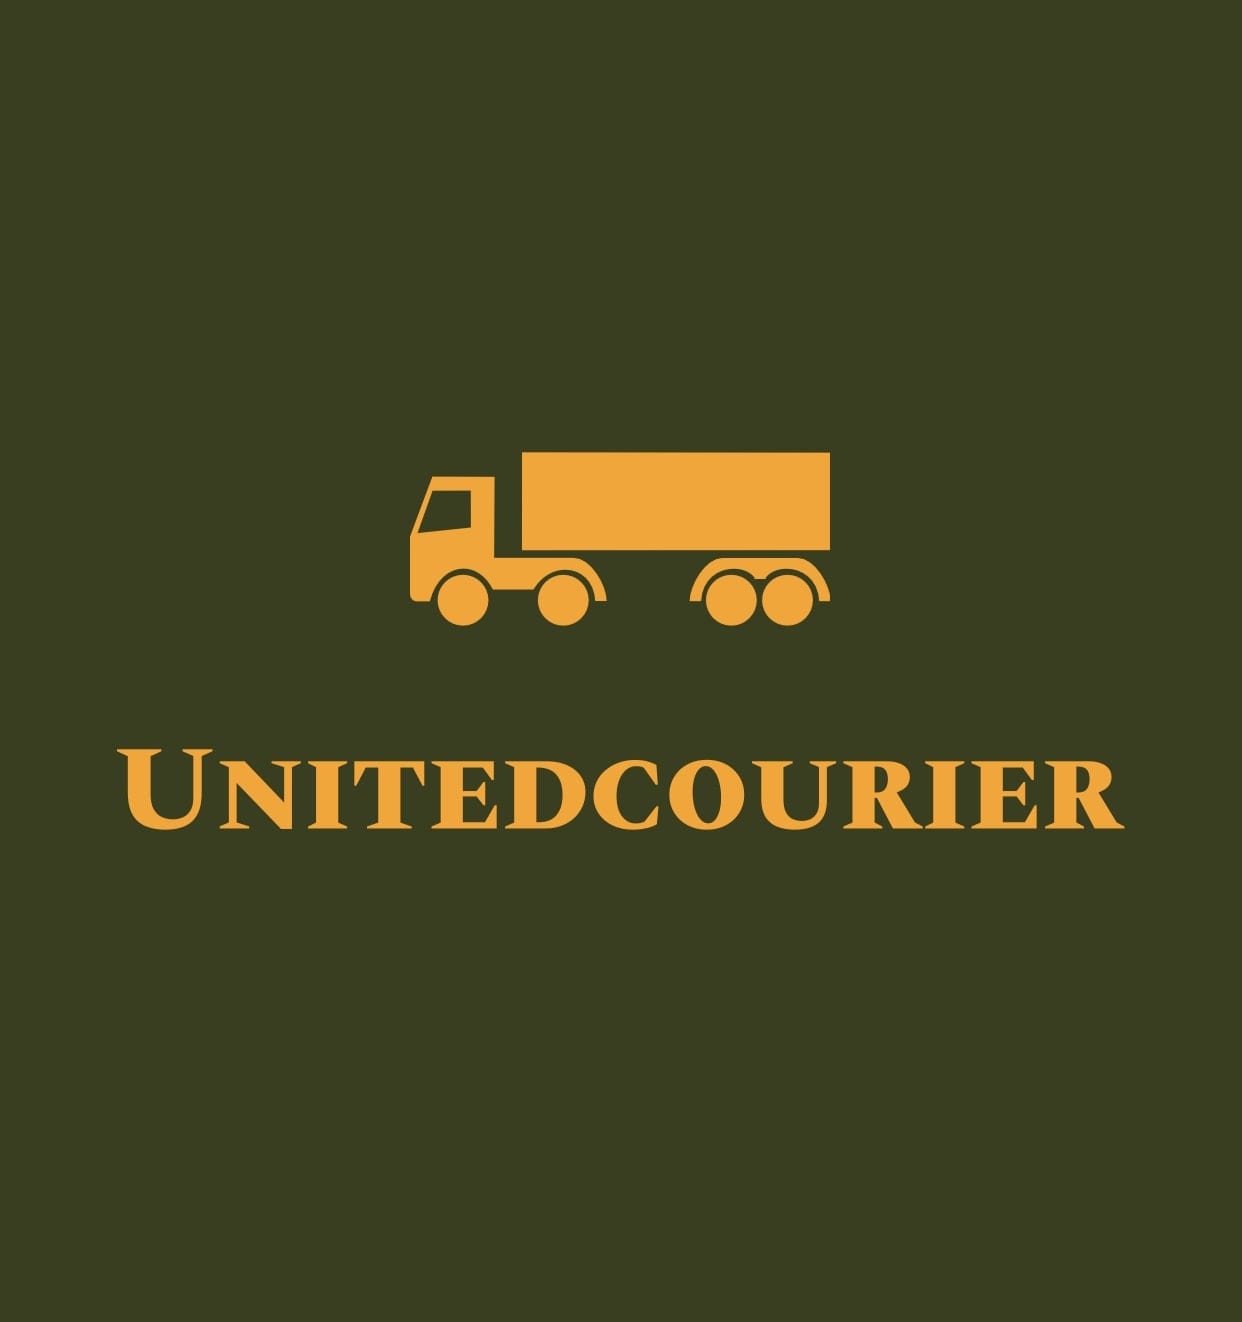 United courier services